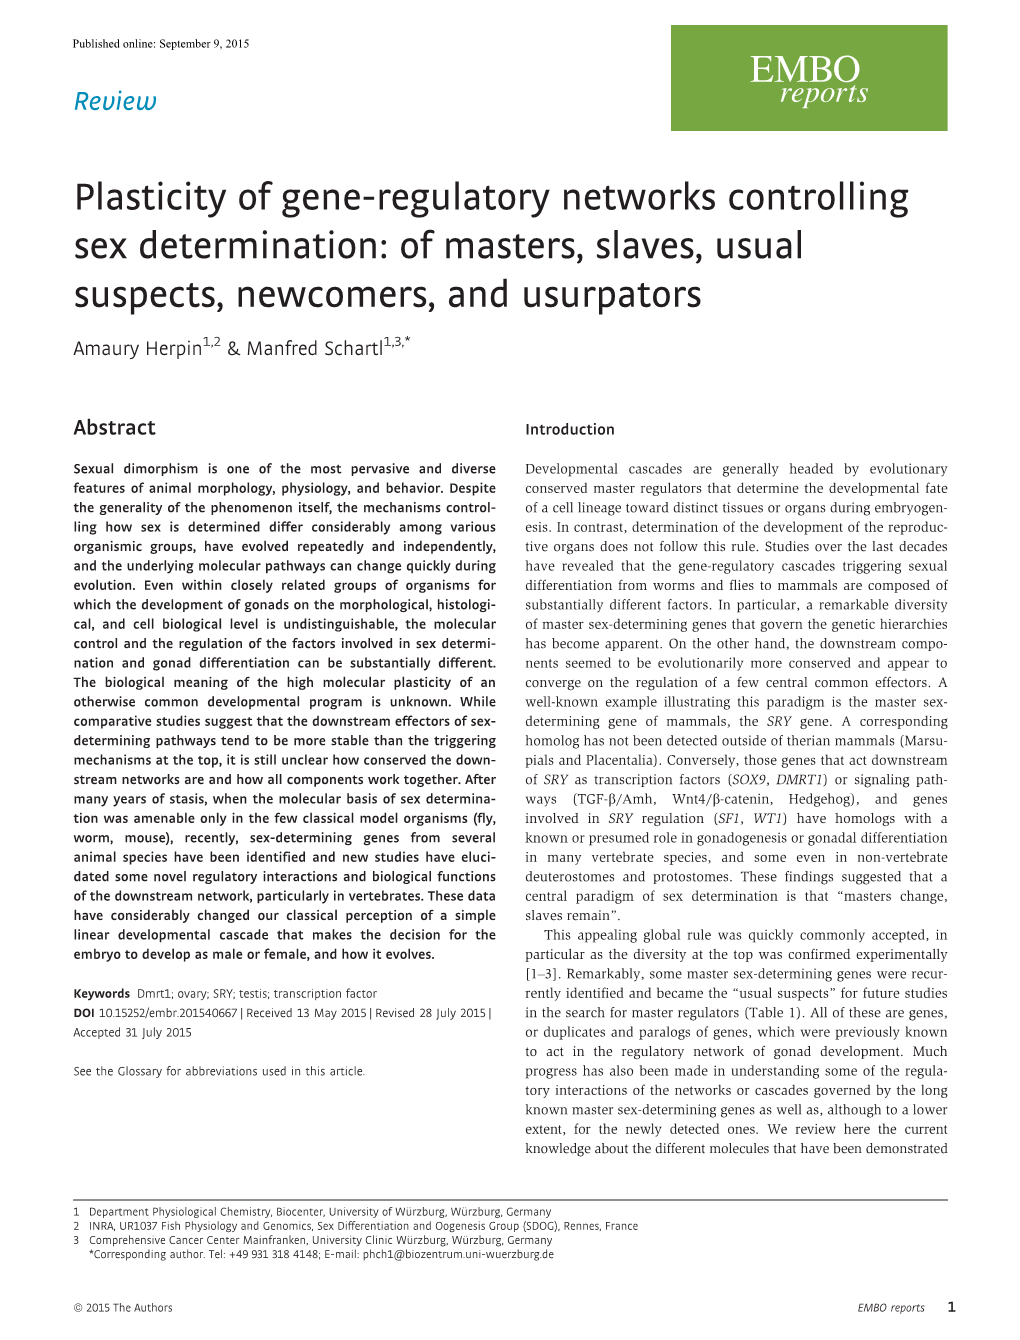 Plasticity of Gene-Regulatory Networks Controlling Sex Determination: of Masters, Slaves, Usual Suspects, Newcomers, and Usurpators